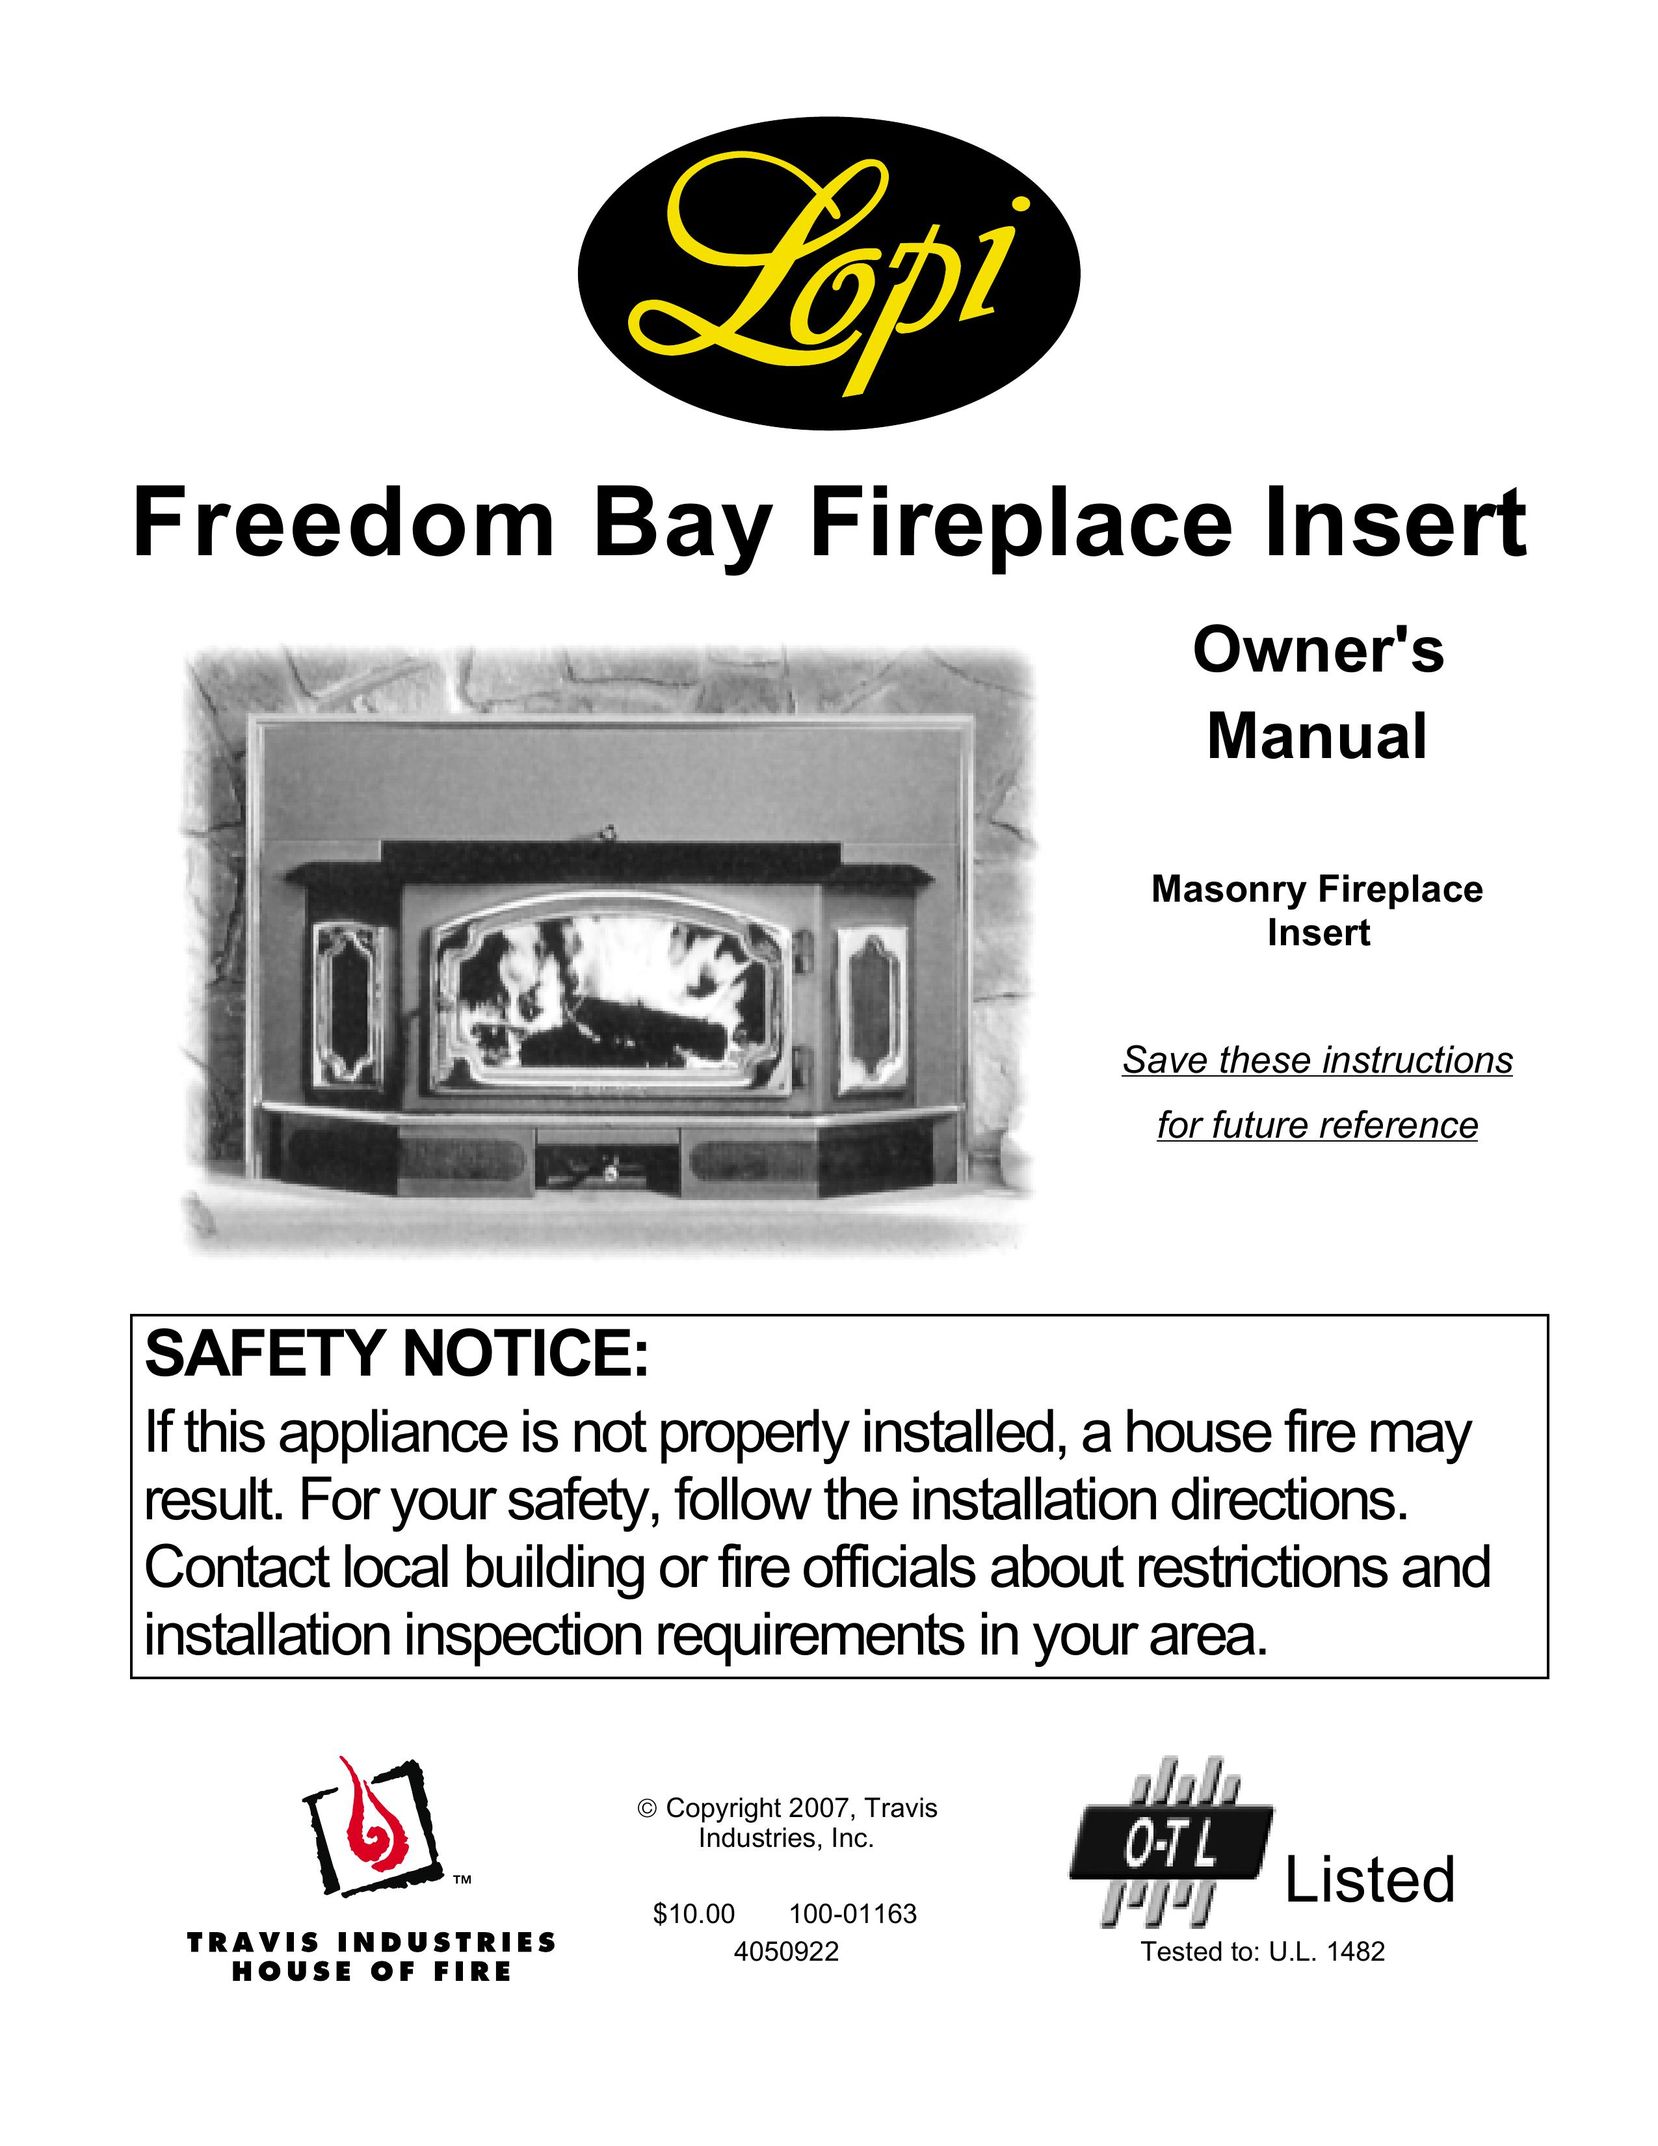 Lopi Freedom Bay Fireplace Insert Indoor Fireplace User Manual